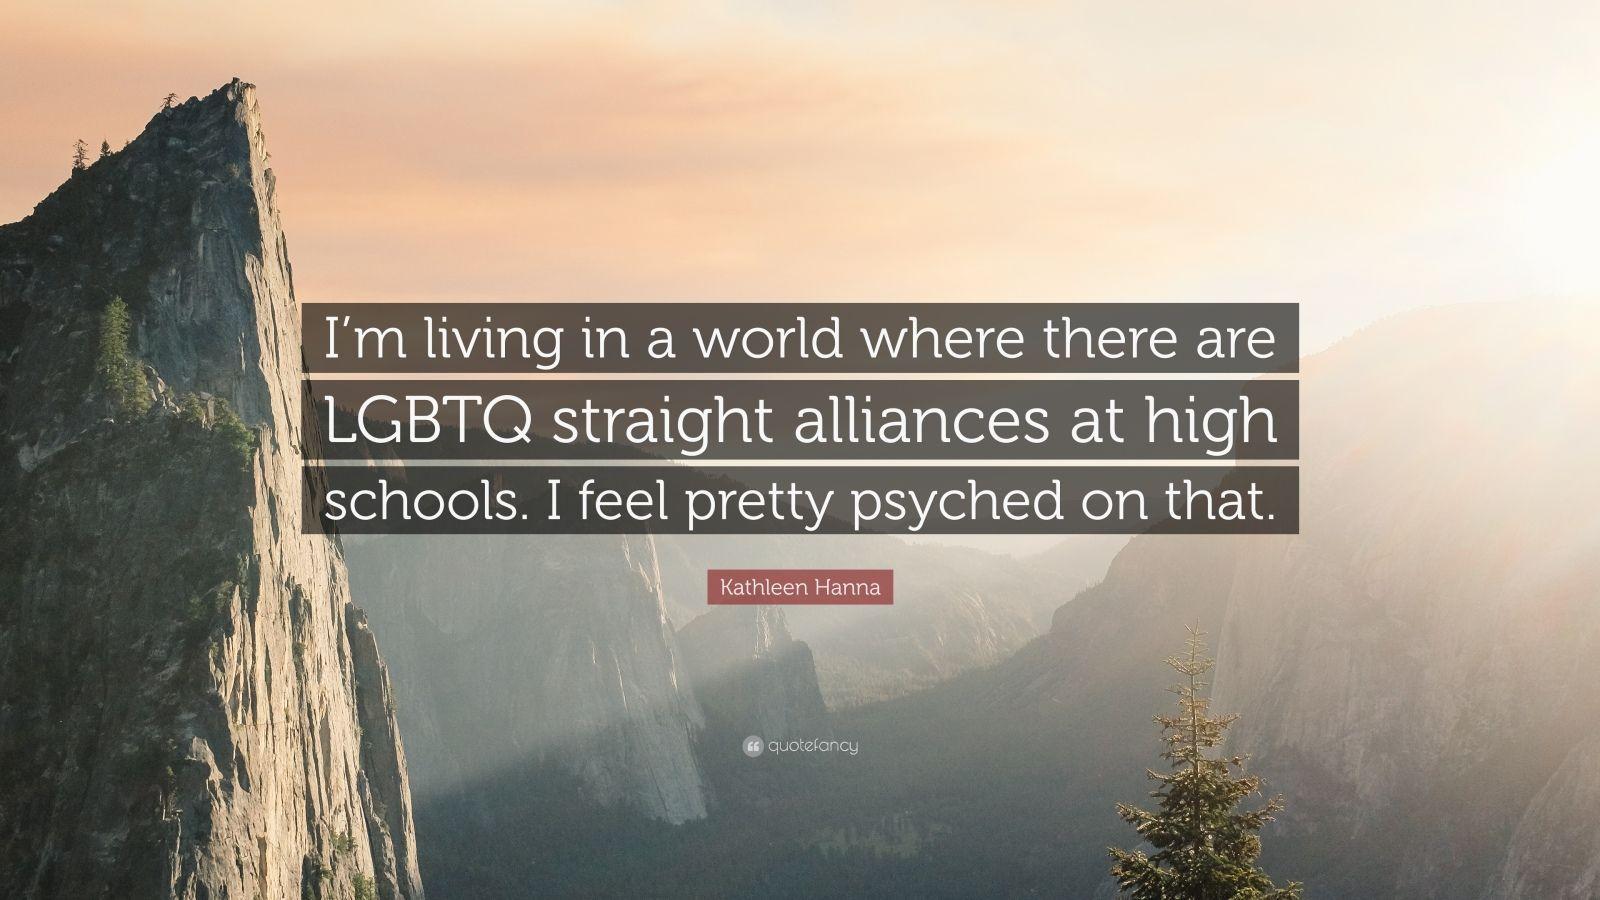 Kathleen Hanna Quote: “I'm living in a world where there are LGBTQ